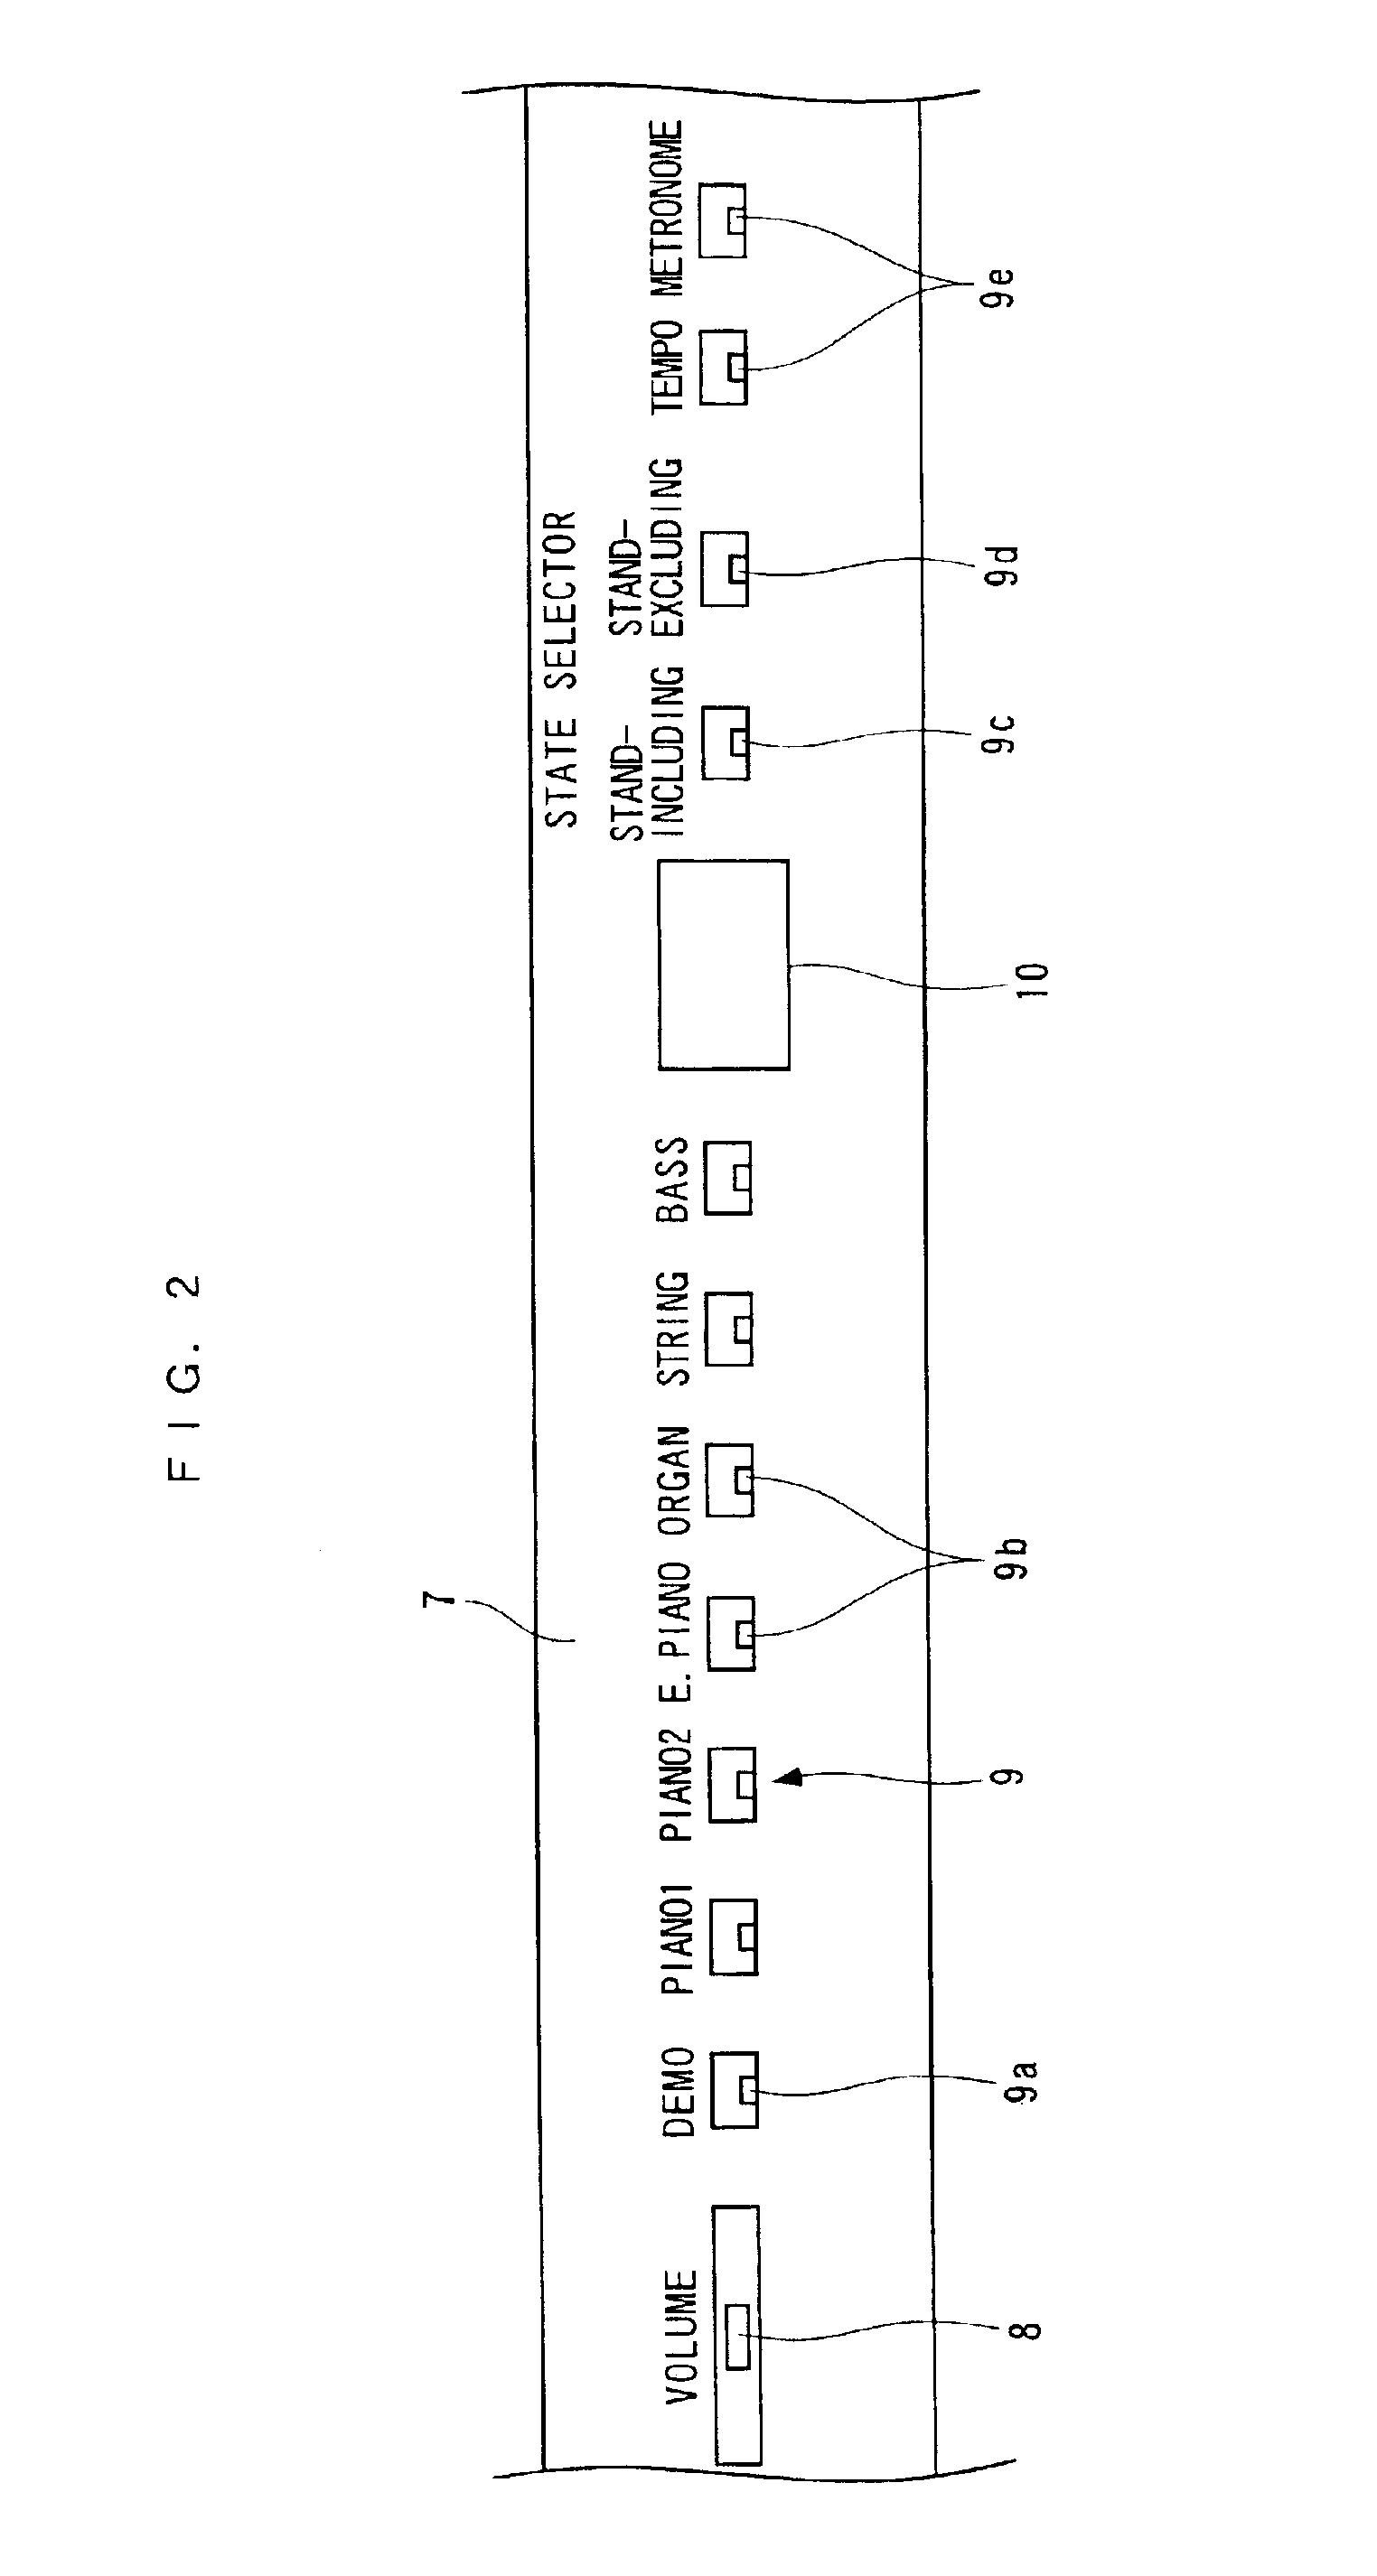 Acoustic control system for electronic musical instrument